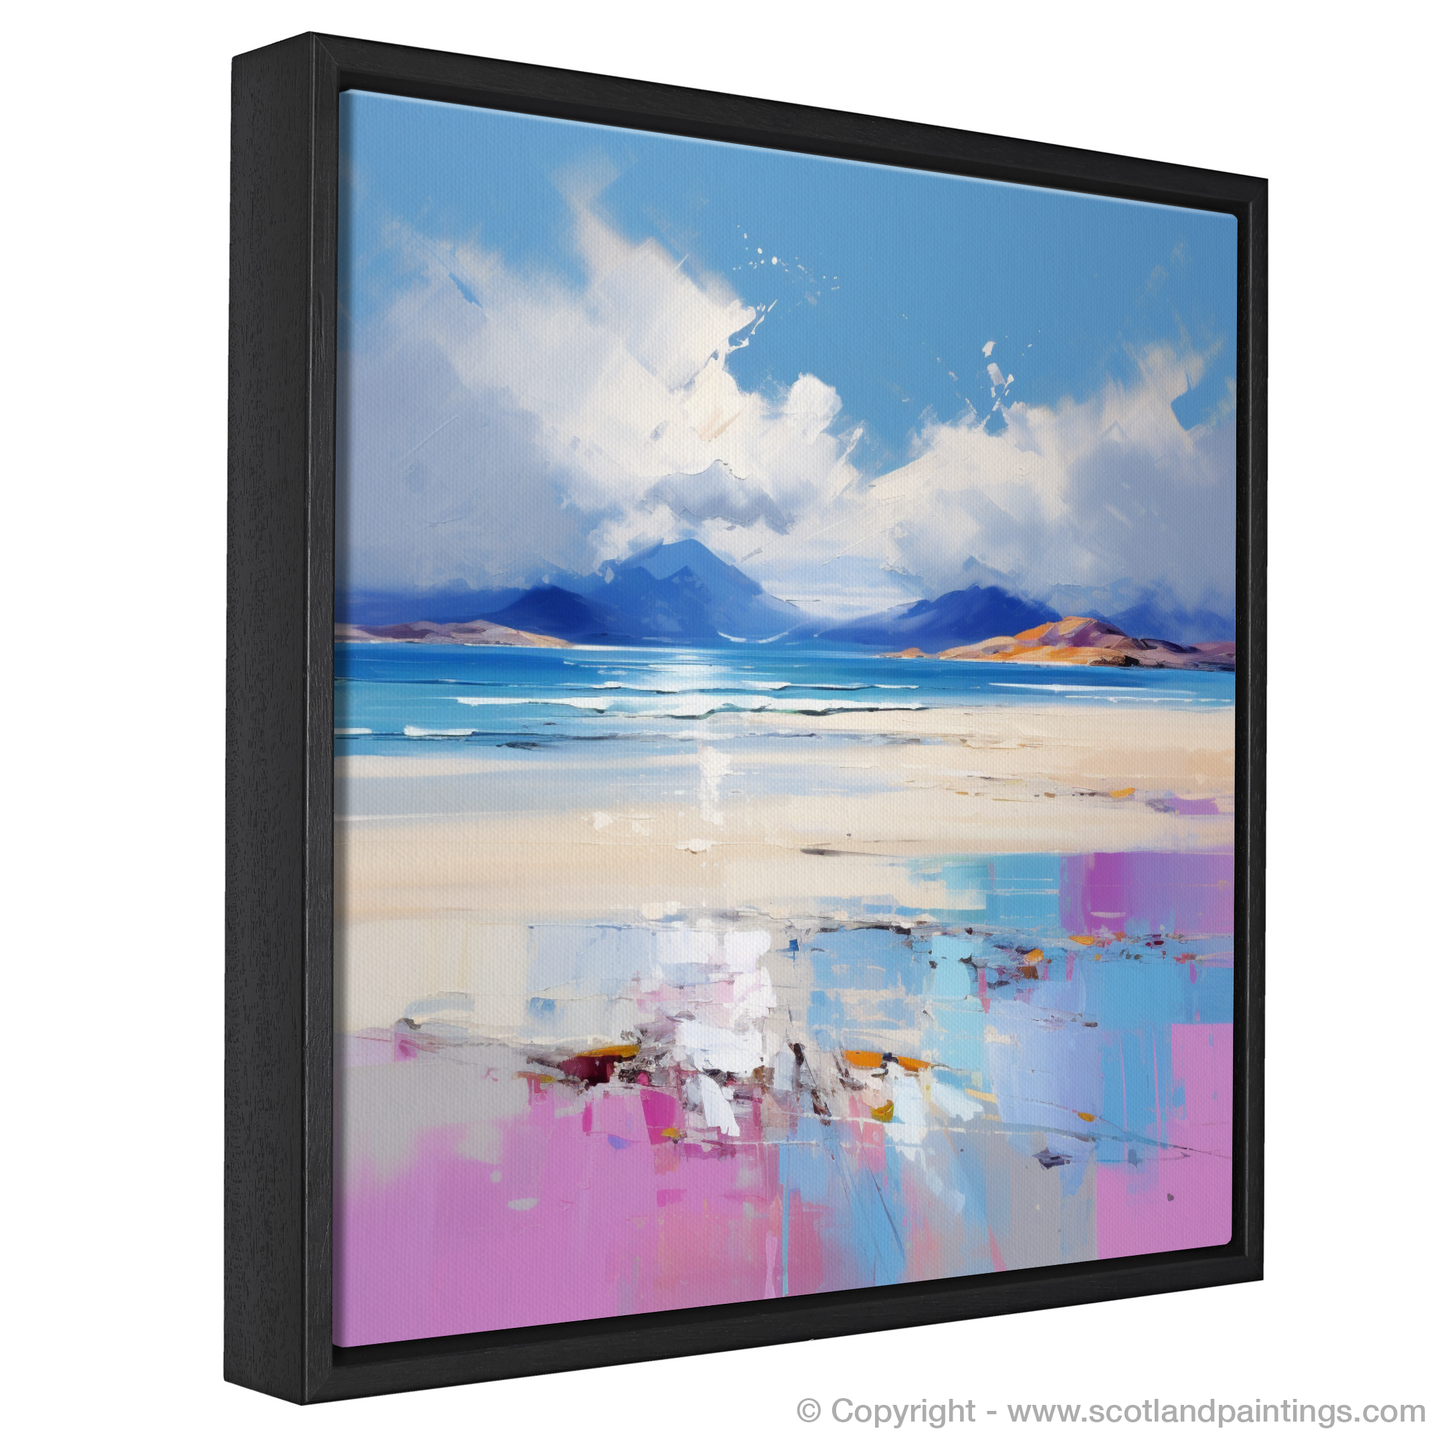 Painting and Art Print of Luskentyre Beach, Isle of Harris entitled "Luskentyre Whispers: An Expressionist Ode to the Hebrides".